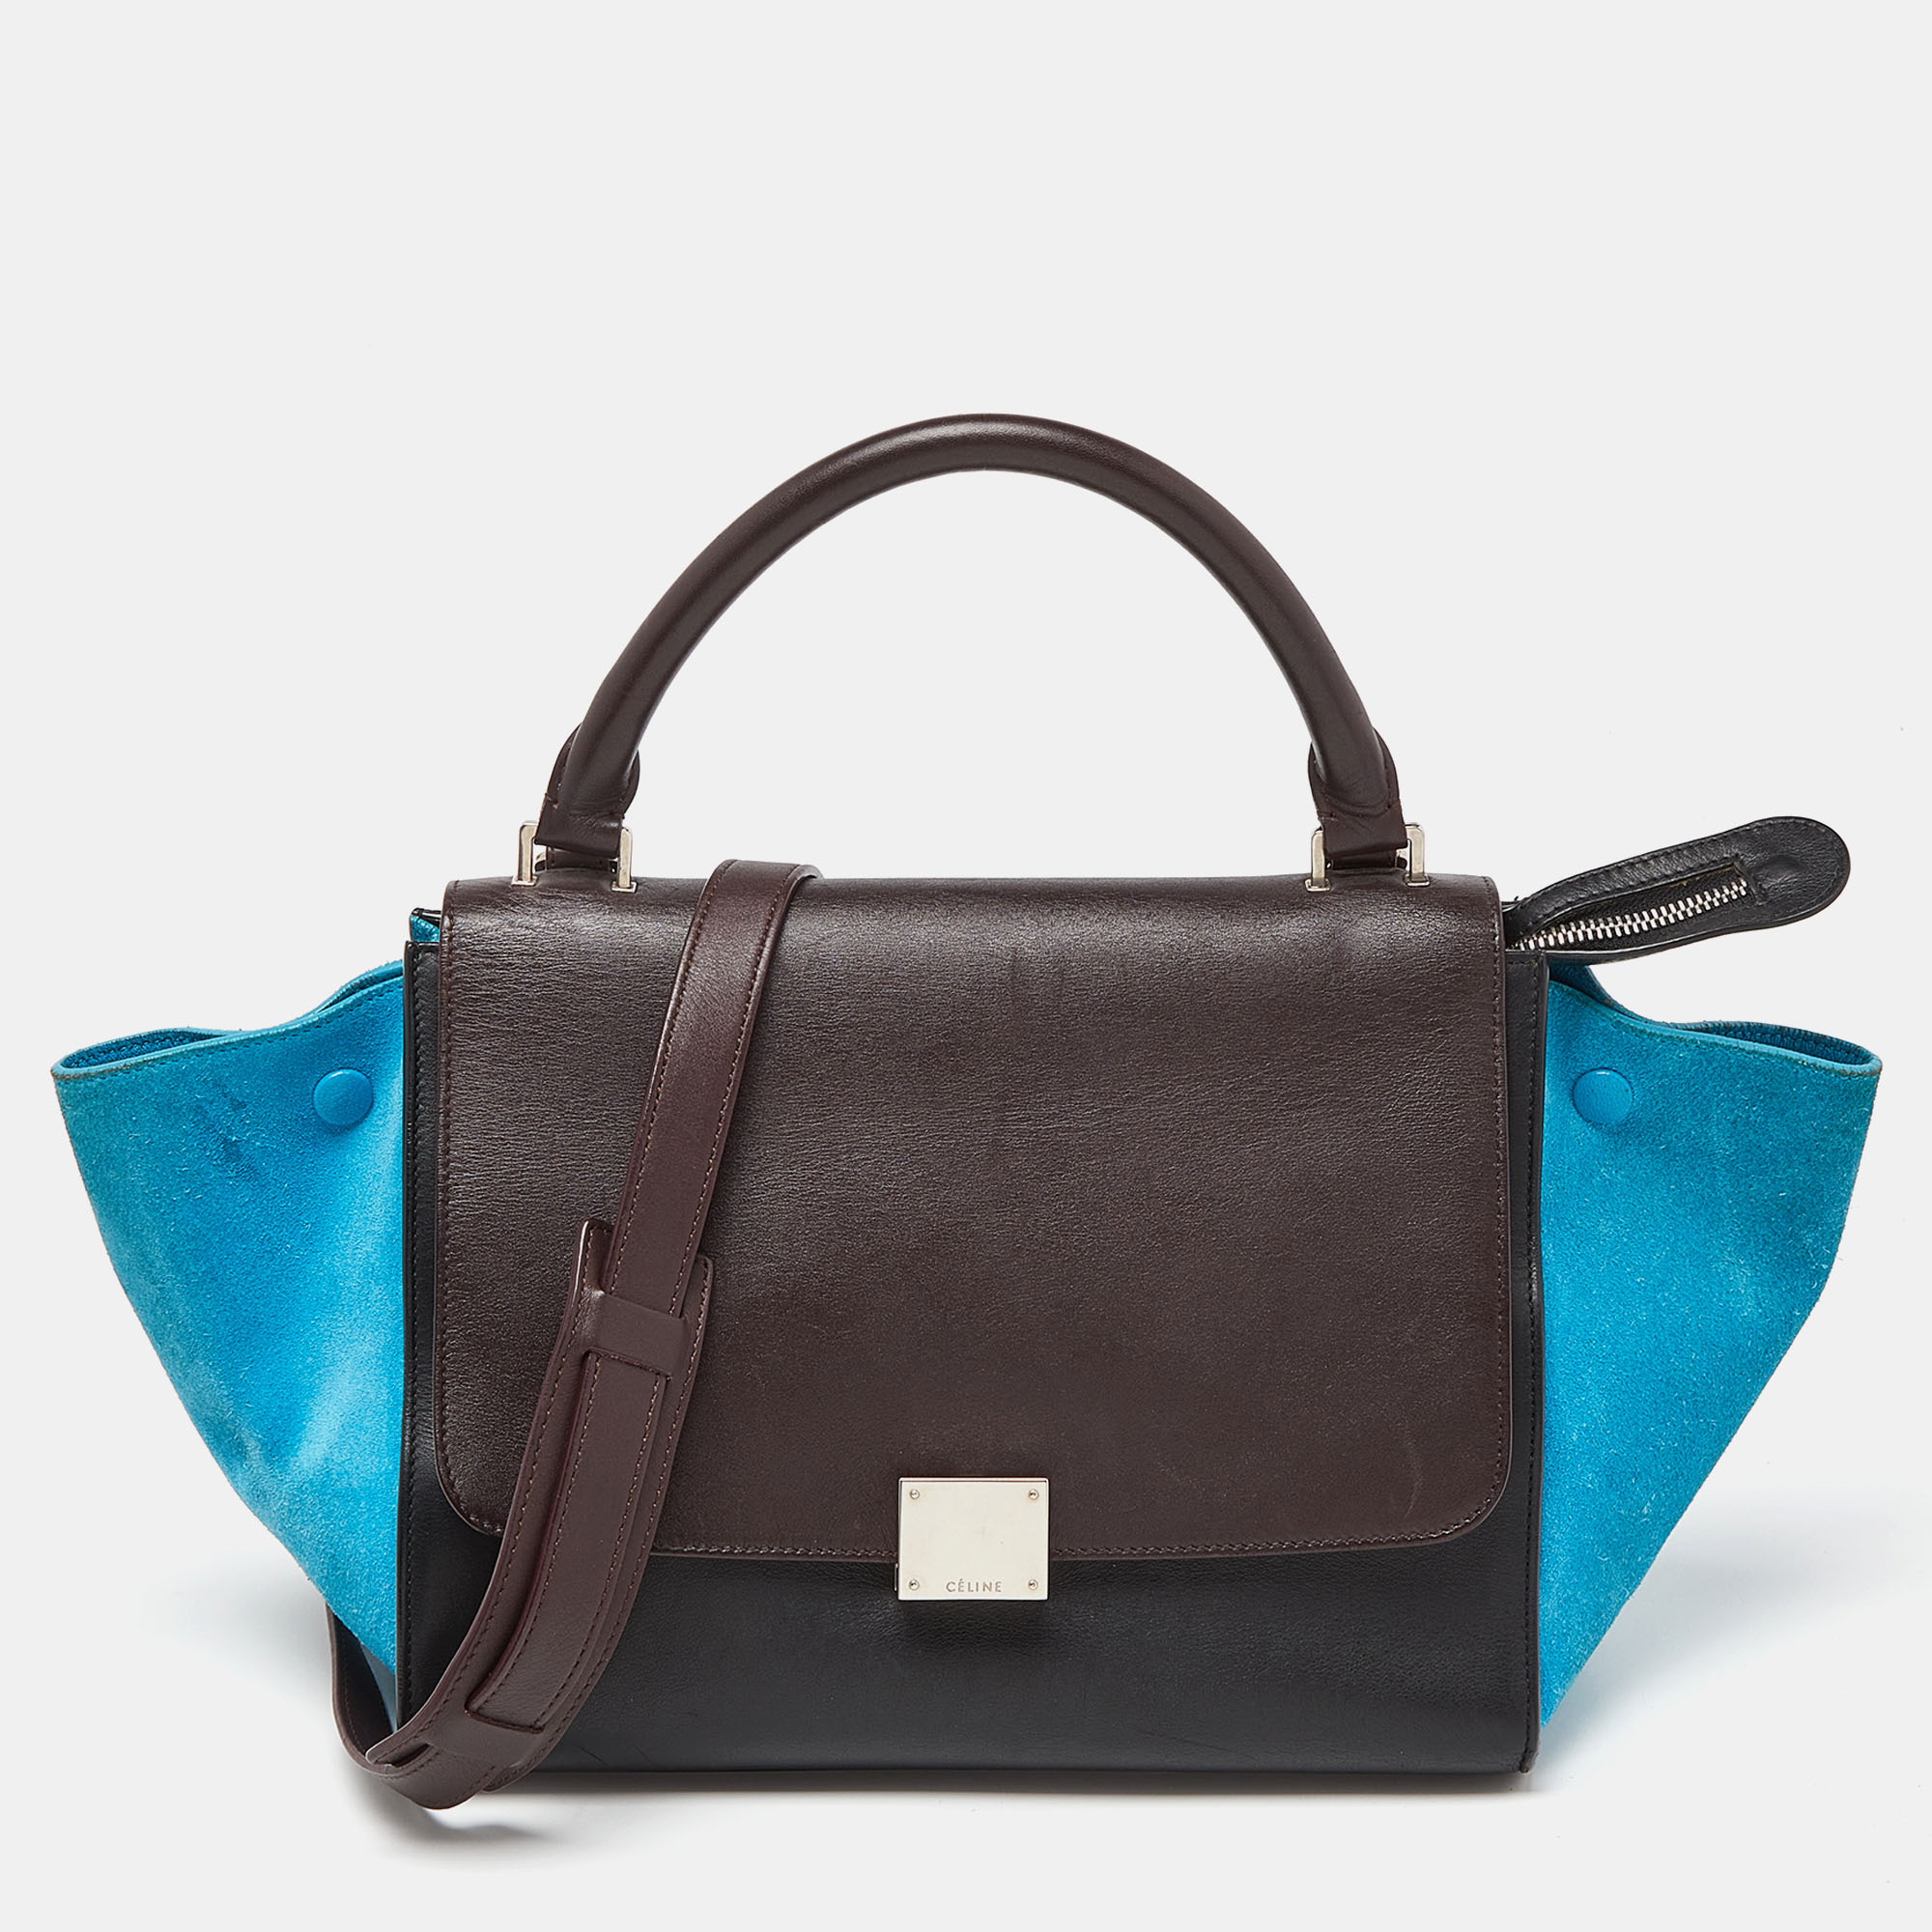 Celine tri color leather and suede small trapeze top handle bag